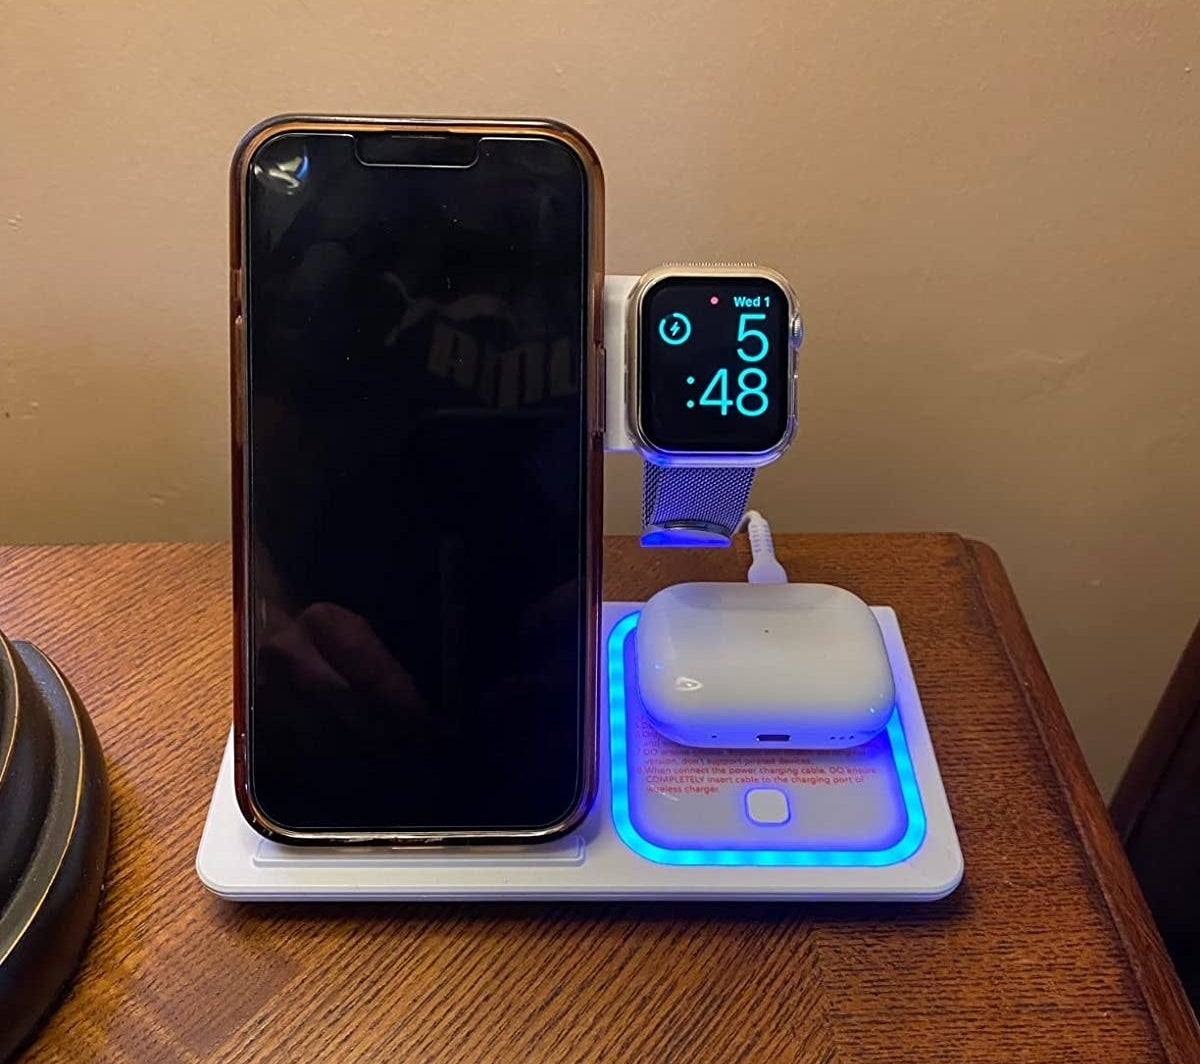 Reviewer image of devices charging in the charging station